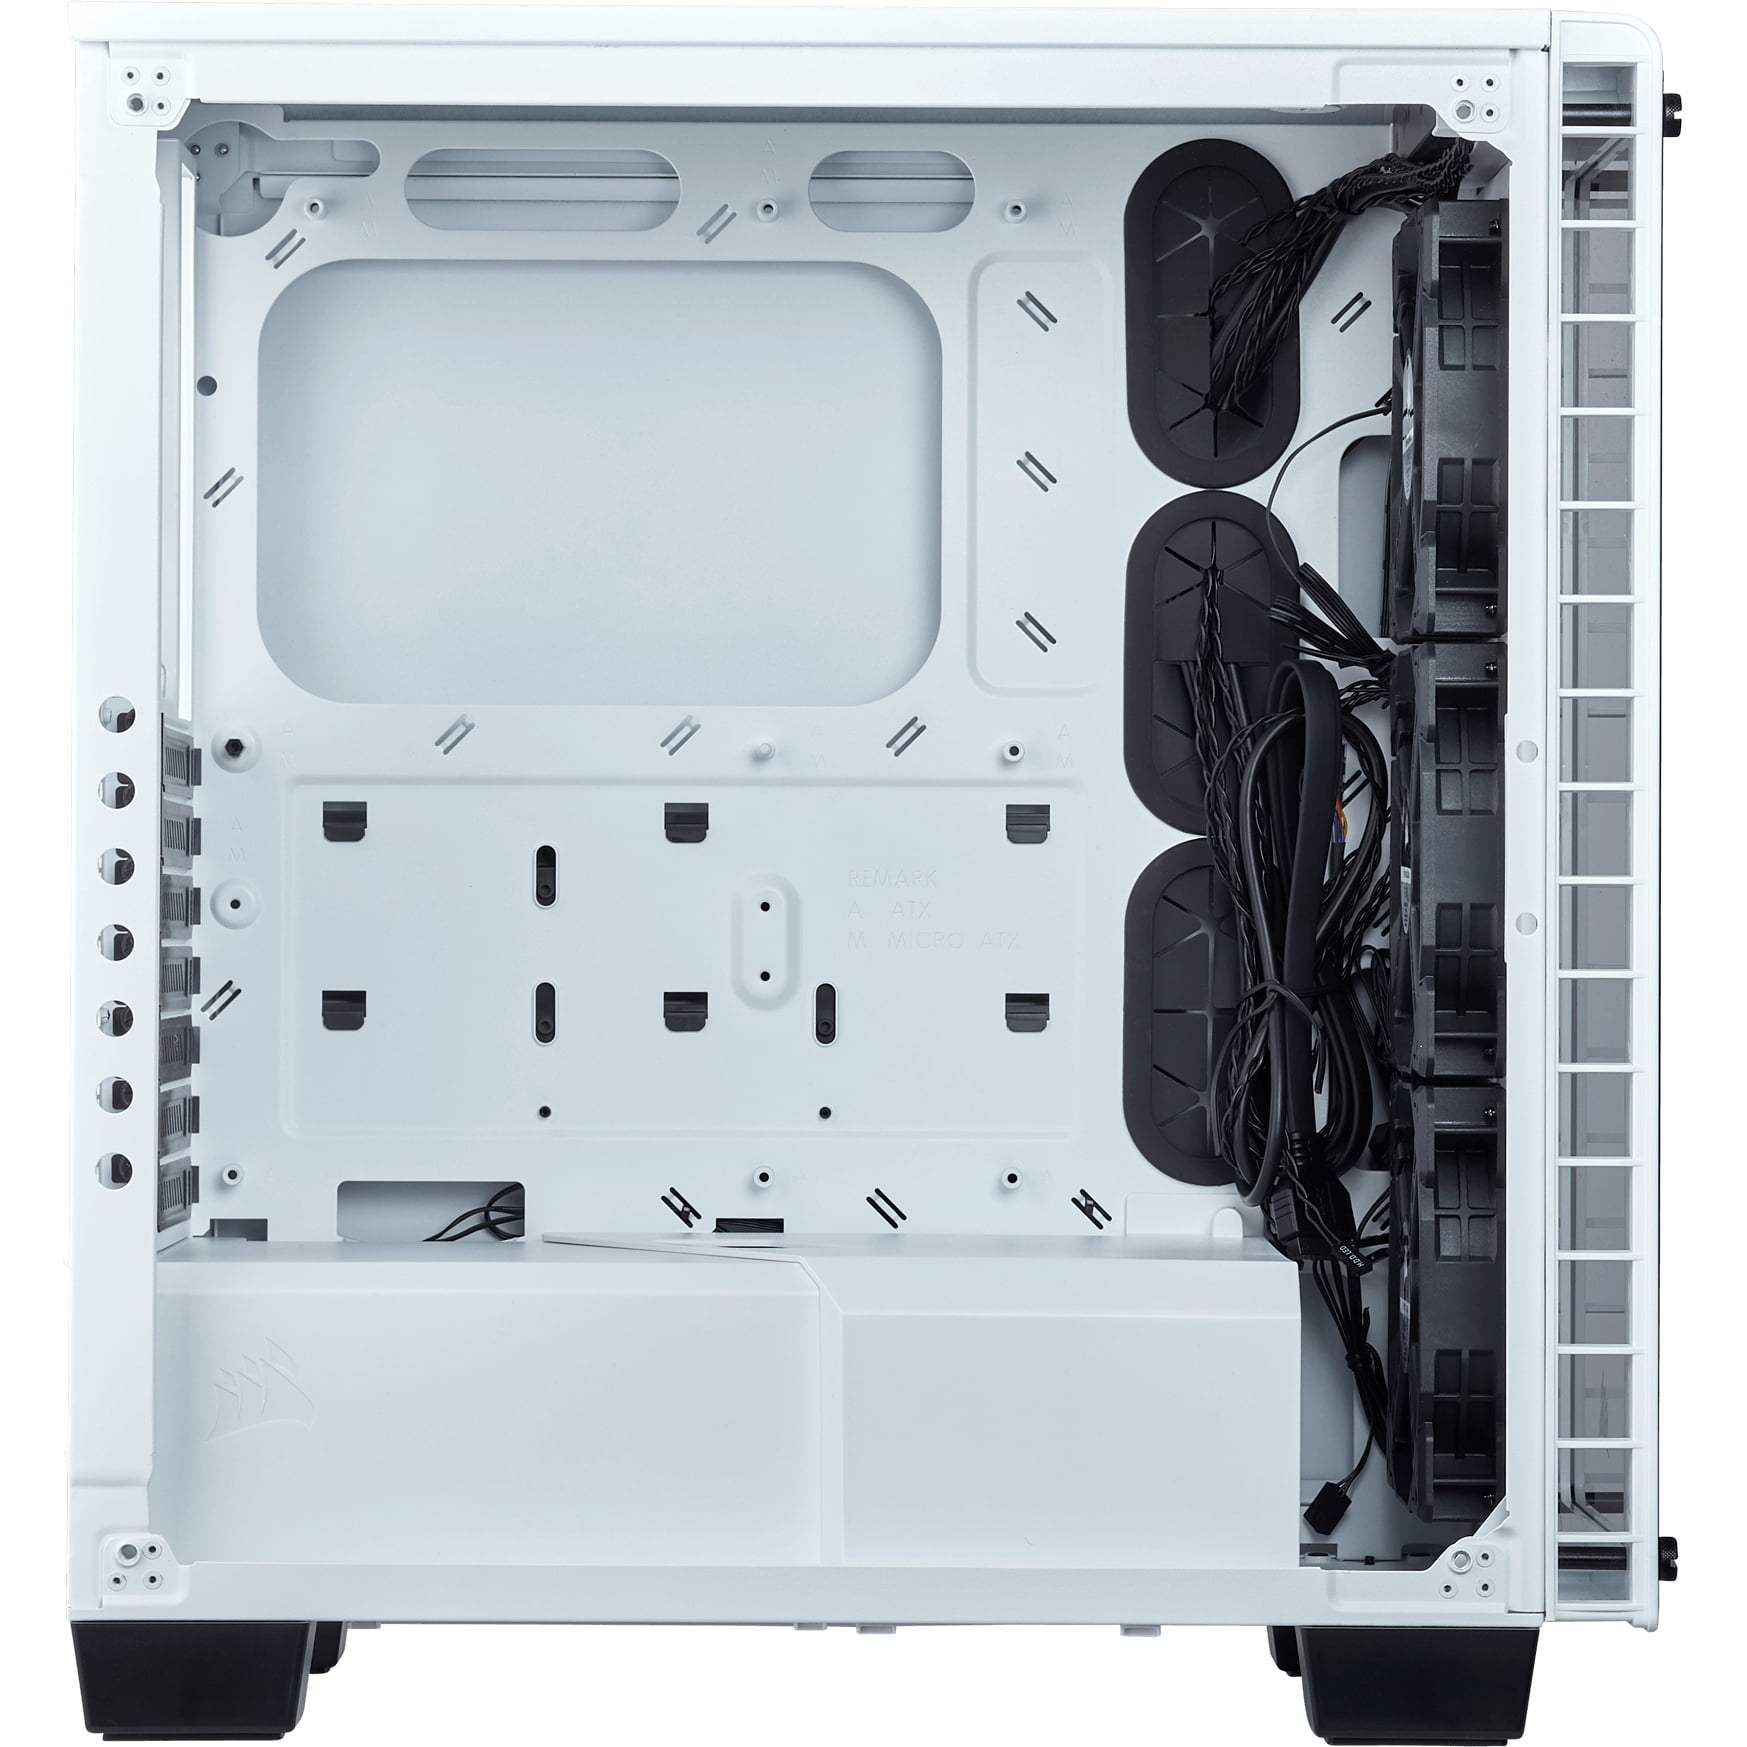 Corsair Crystal Series 460X RGB Compact ATX Case - White - Mid- tower - White - Steel, Tempered Glass - 5 x Bay - 3 x 4.72" x Fan(s) 0 -